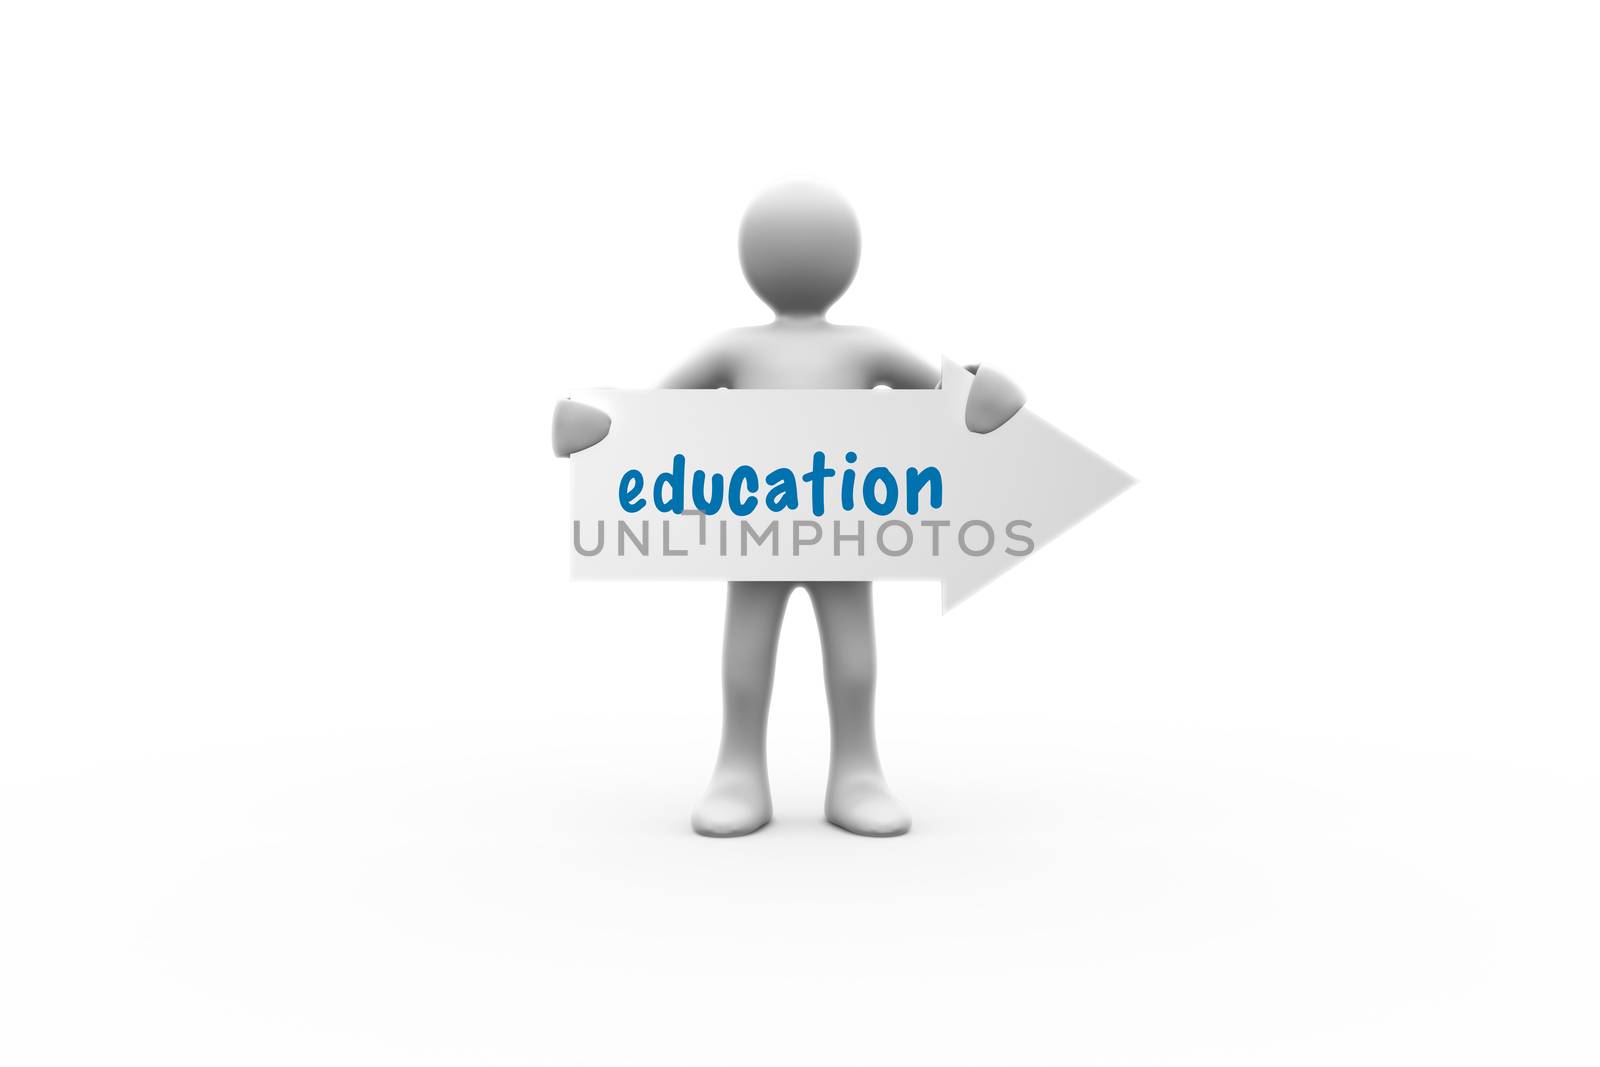 The word education and human representation holding arrow sign against white background with vignette